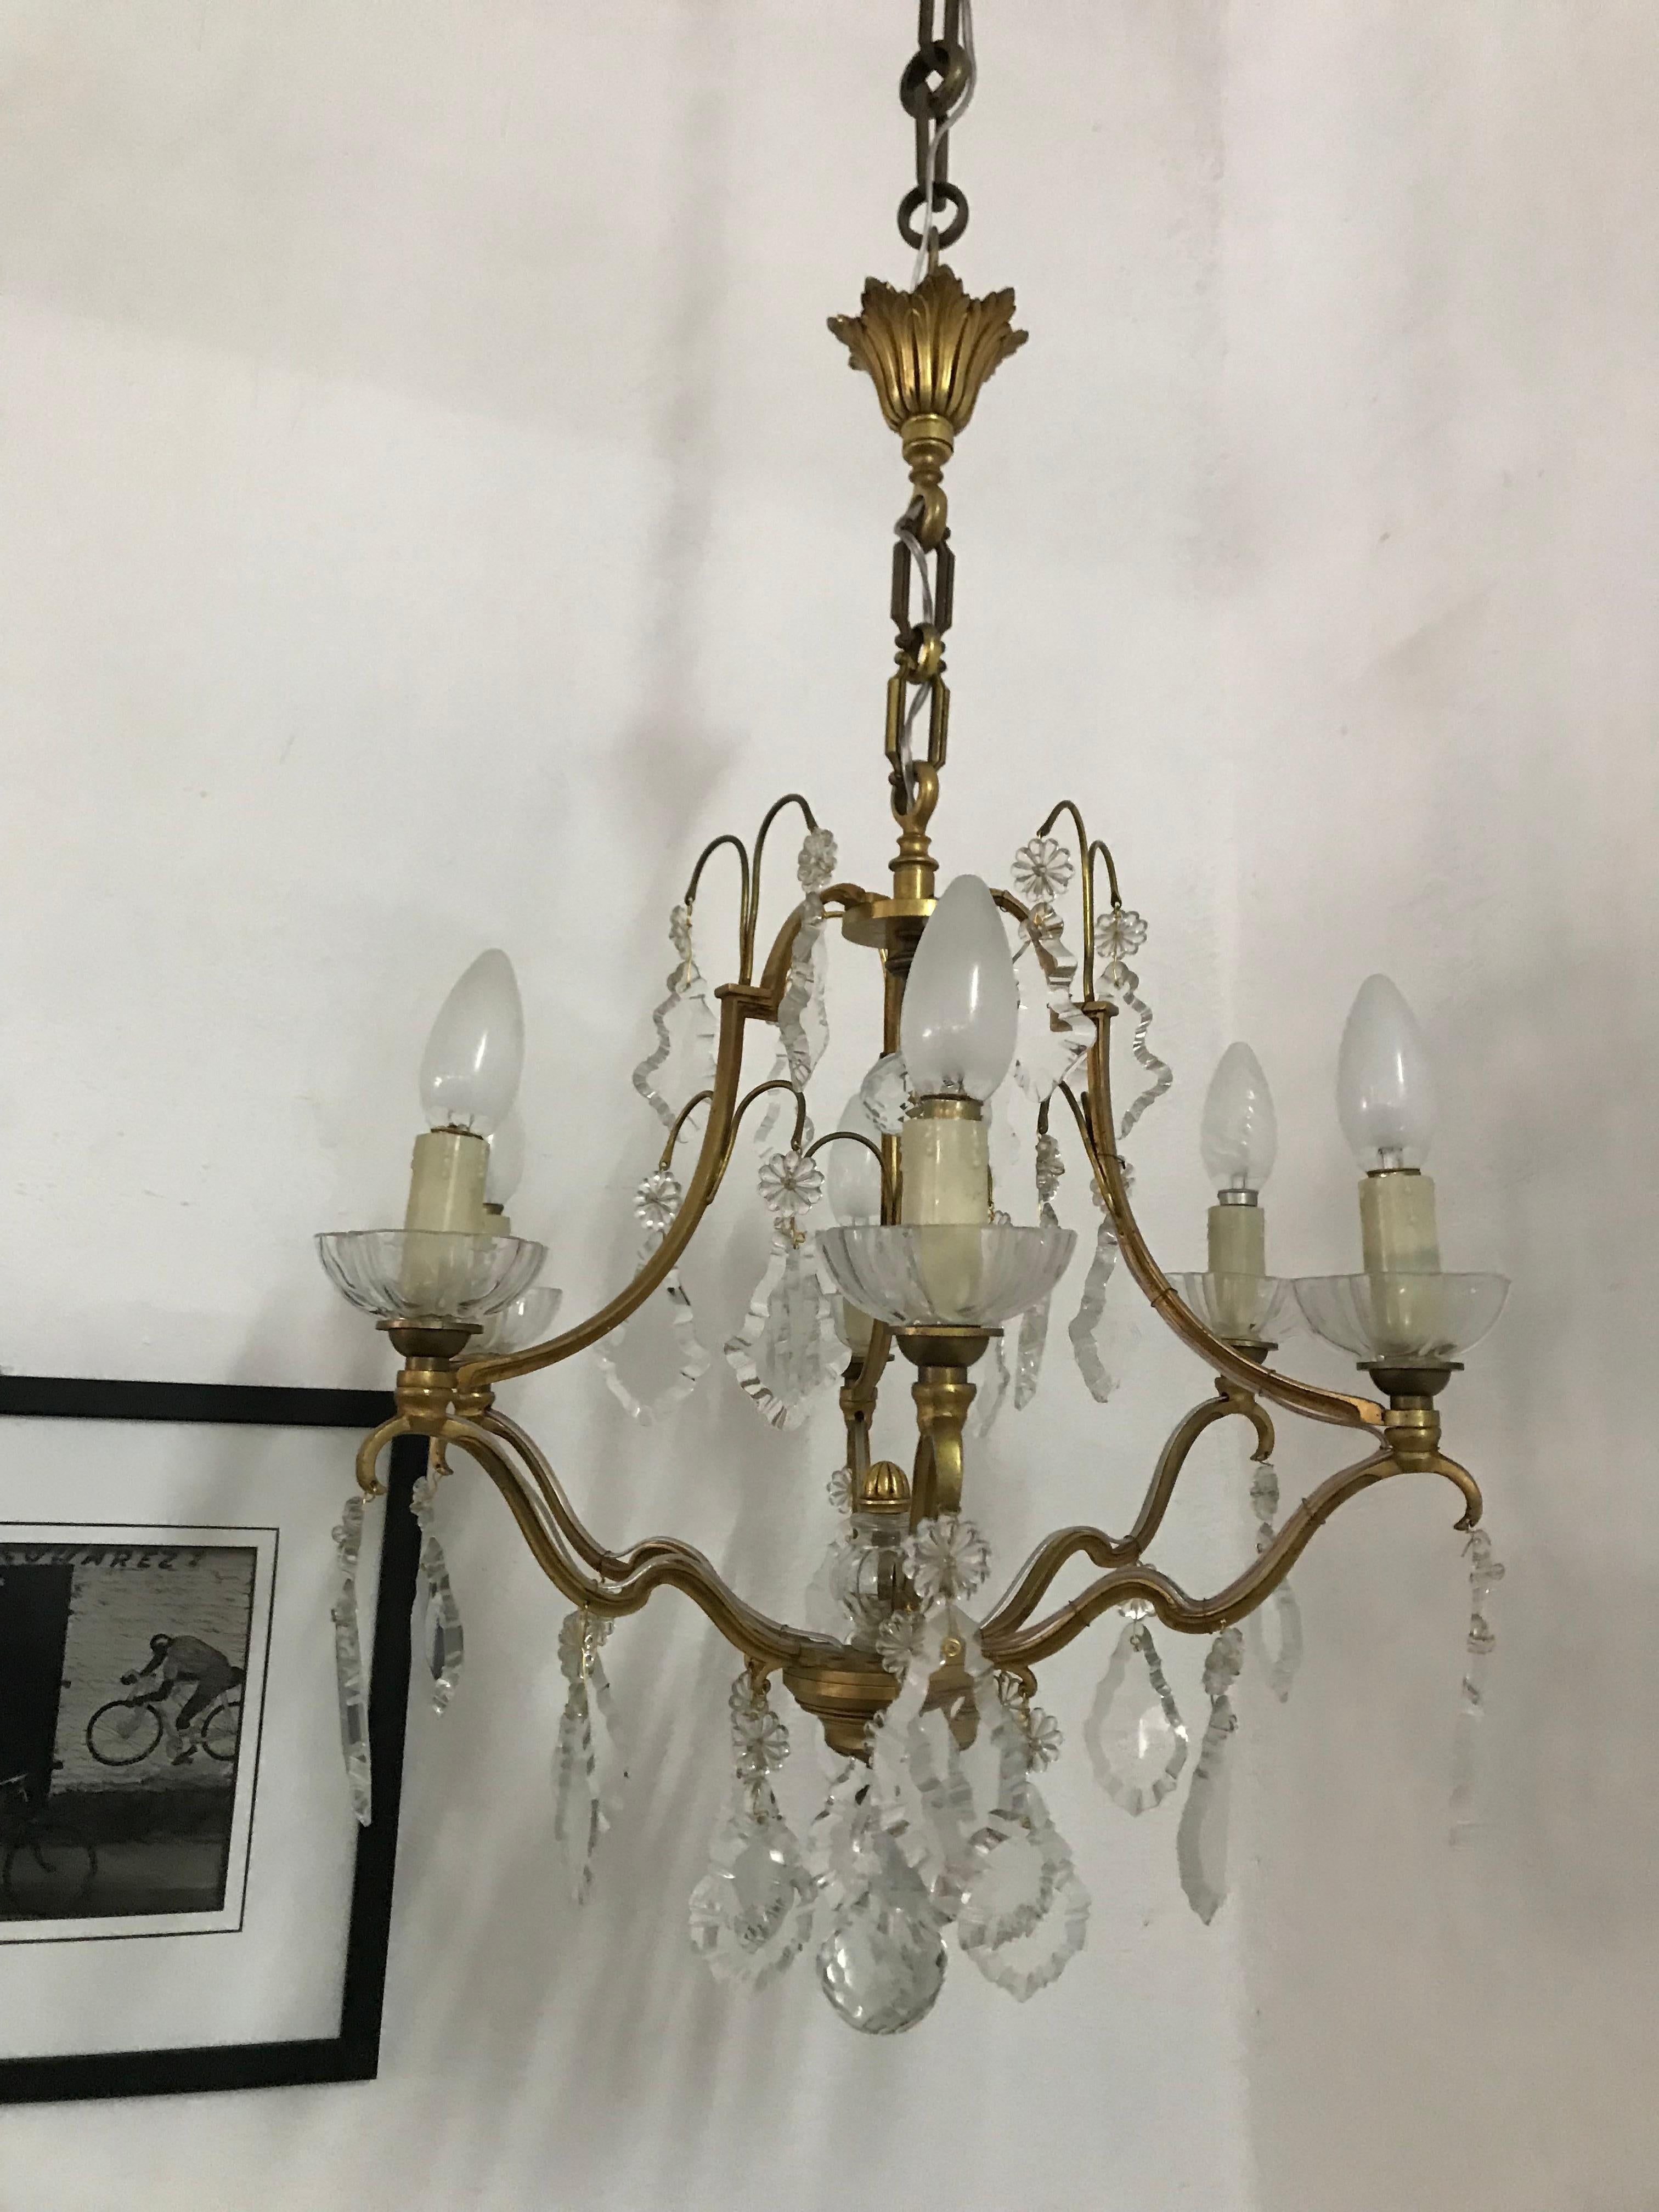 French Mid-Century Modern Signed Gilt Bronze Chandelier by Petitot, France, circa 1940 For Sale